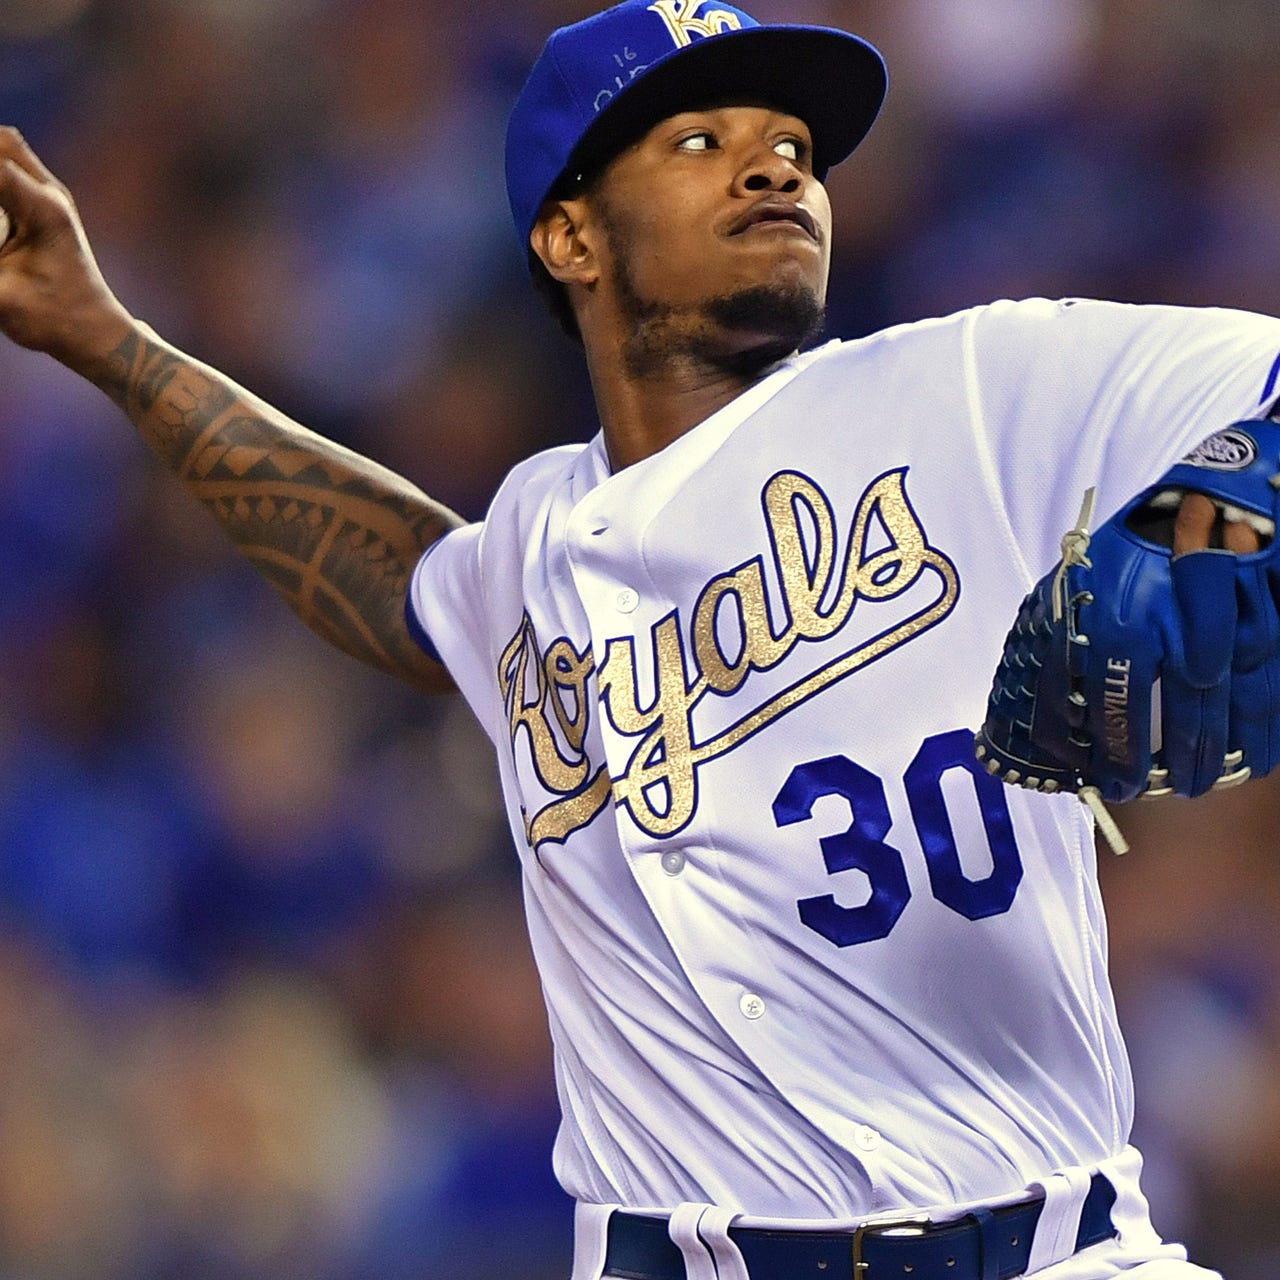 Royals Pitcher Yordano Ventura Died In A Car Accident Last Night